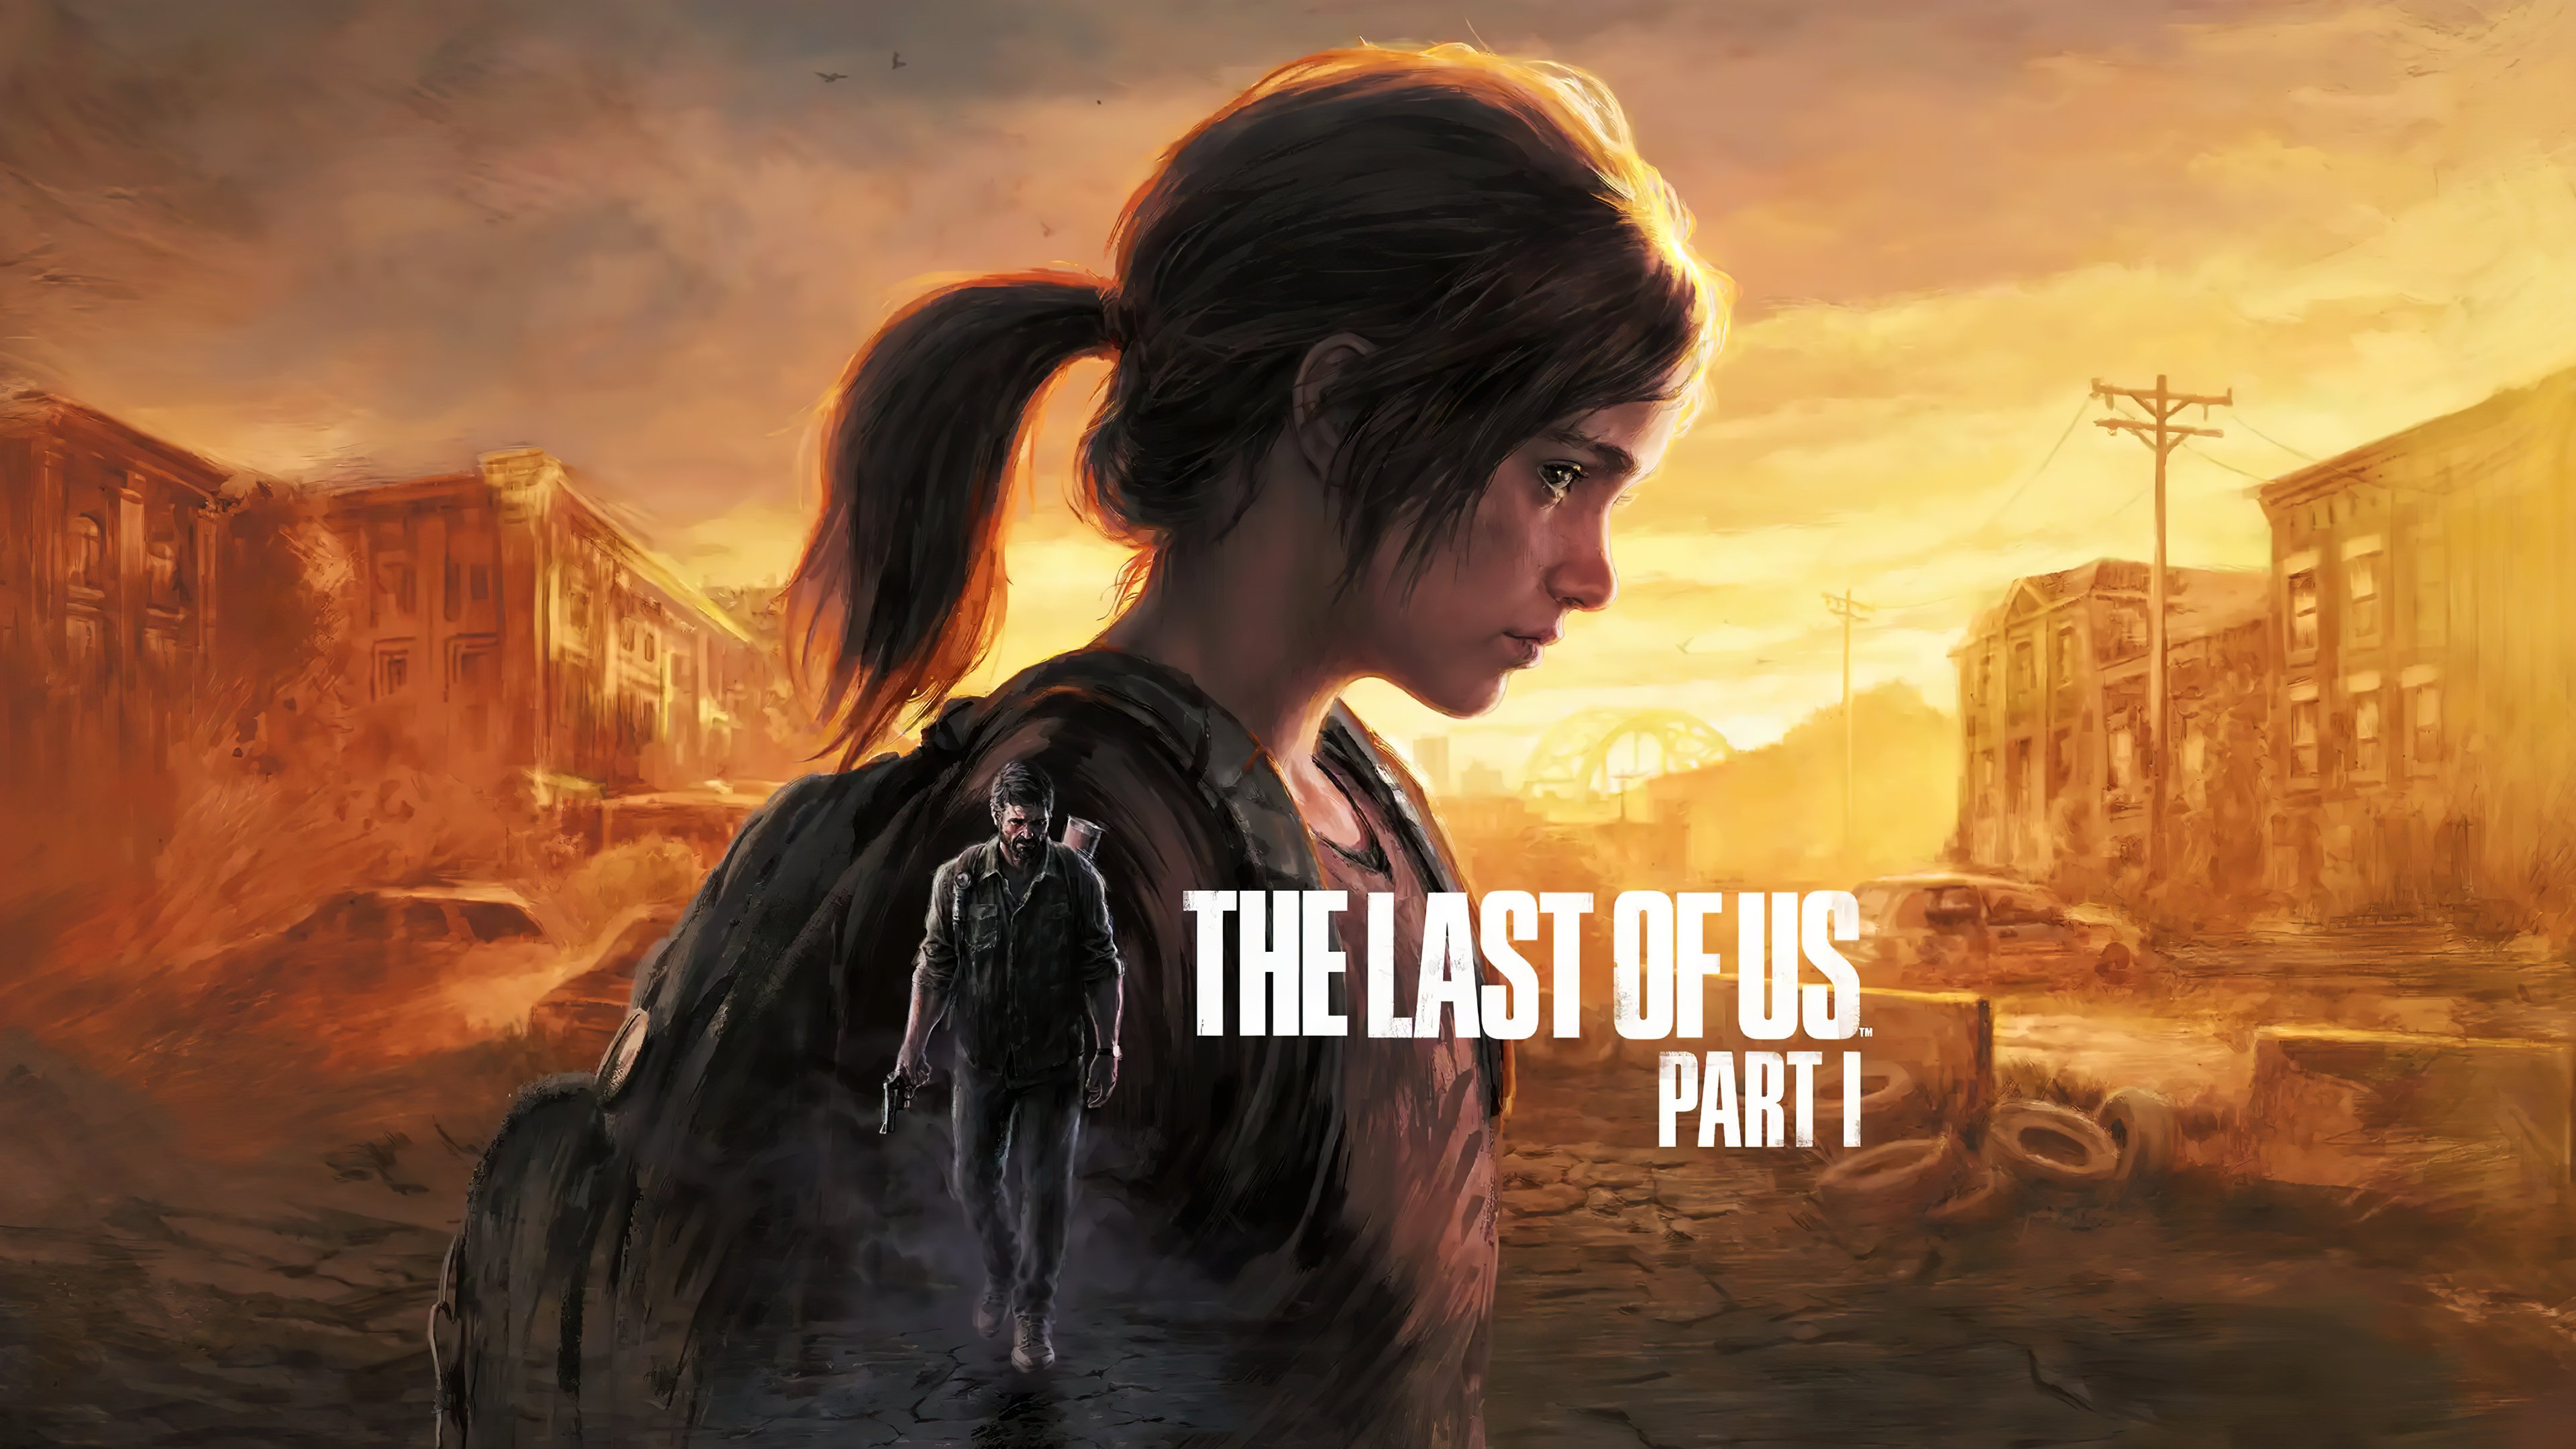 The Last Of Us Ep. 5: Endure And Survive @hbo @hbomax⁠ ⁠ Still not